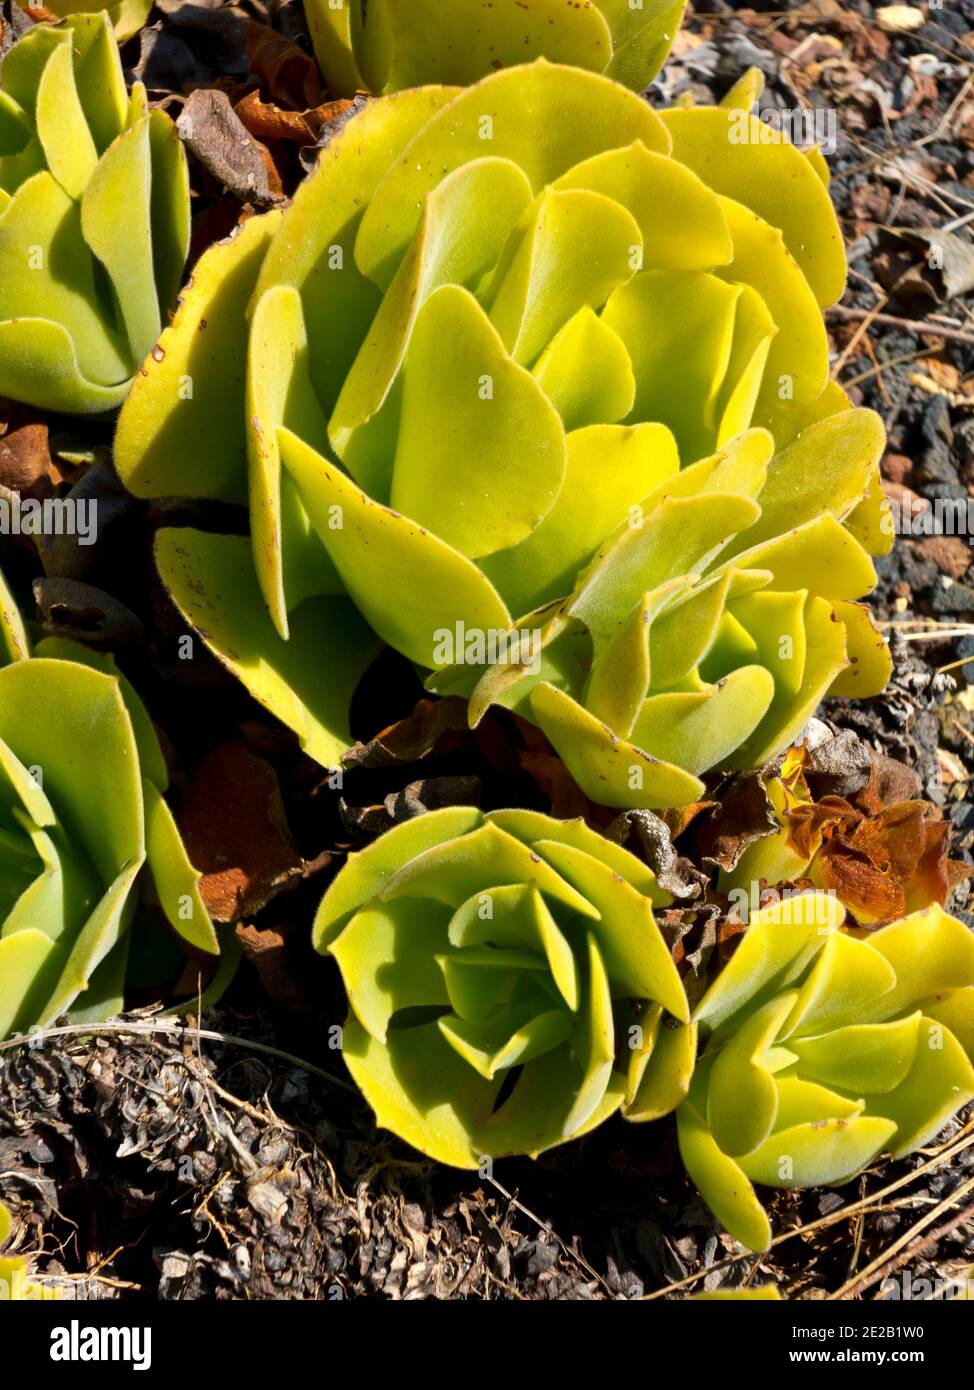 Close up view of Aeonium virgineum plant known as houseleeks as succulent subtropical plant found in Mediterranean climates. Stock Photo